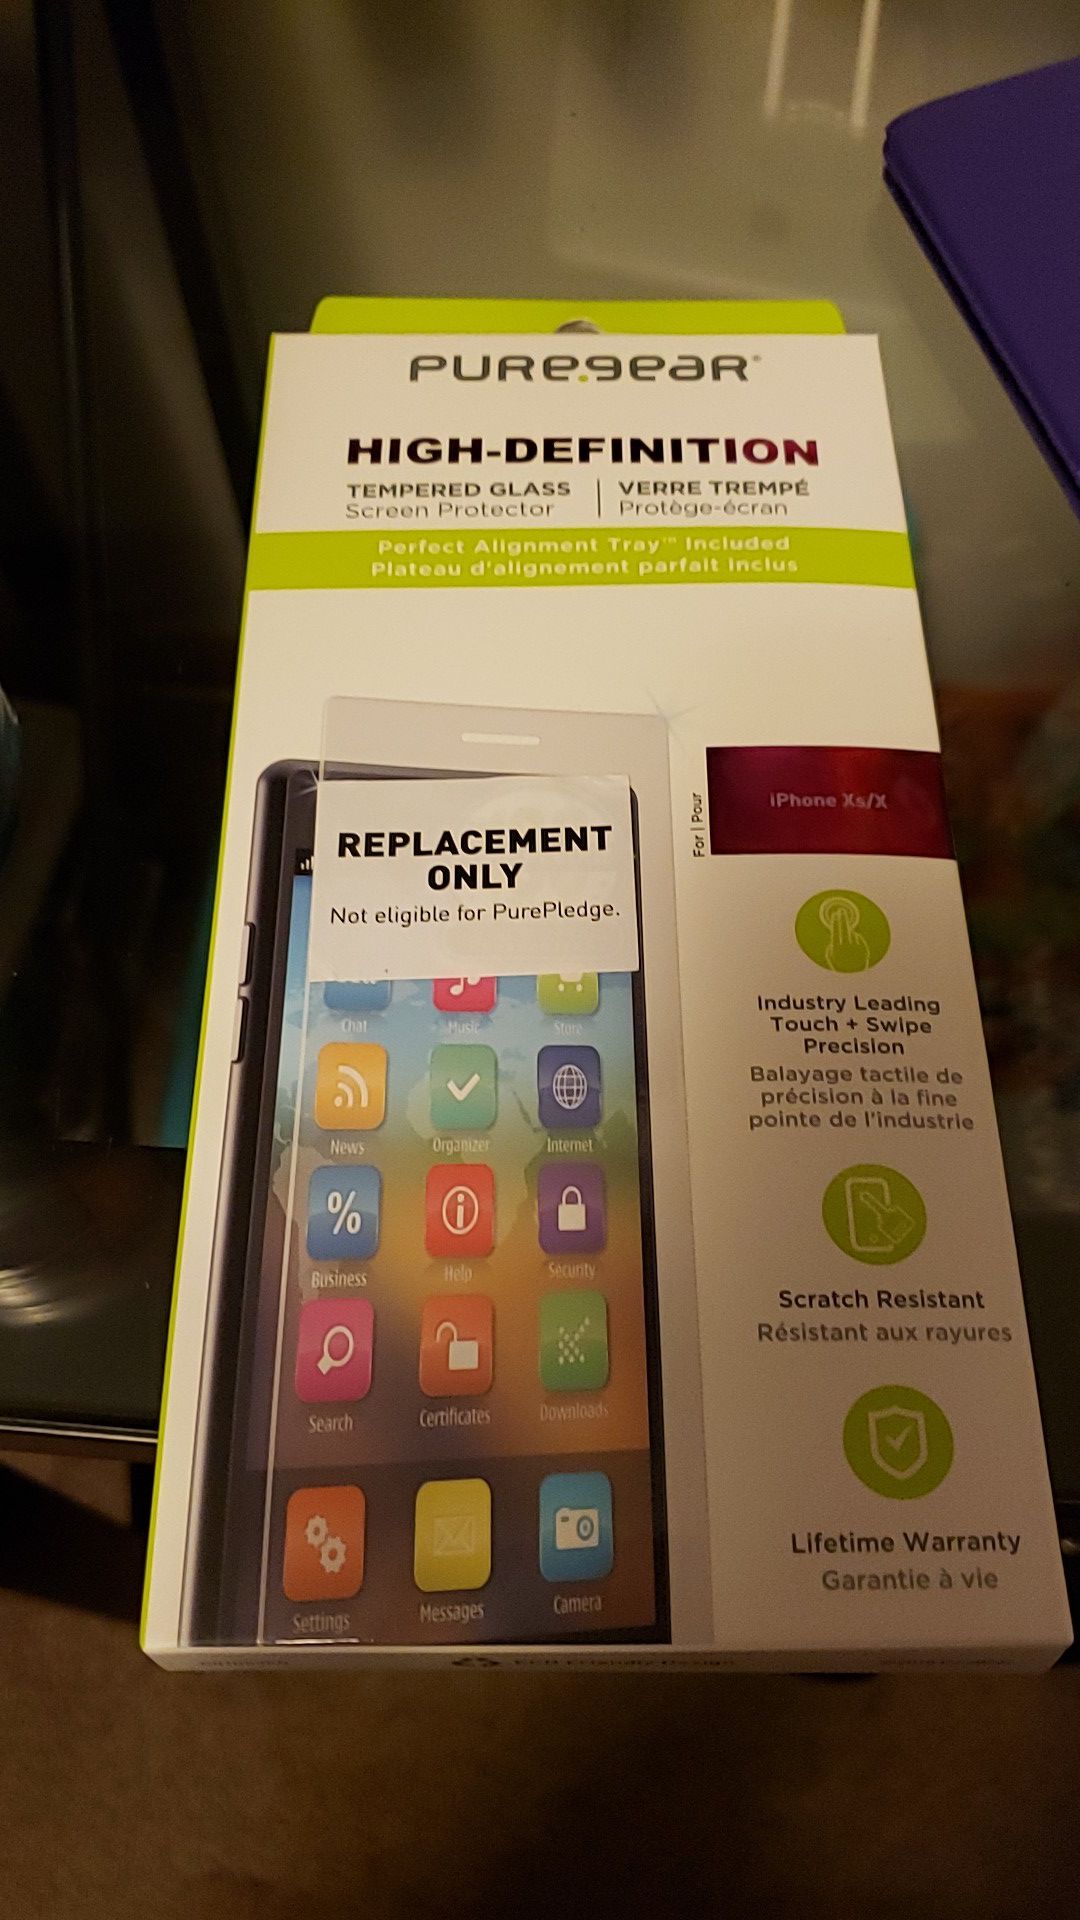 Pure Gear High Definition Tempered Glass iphone Xs/X Screen Protector